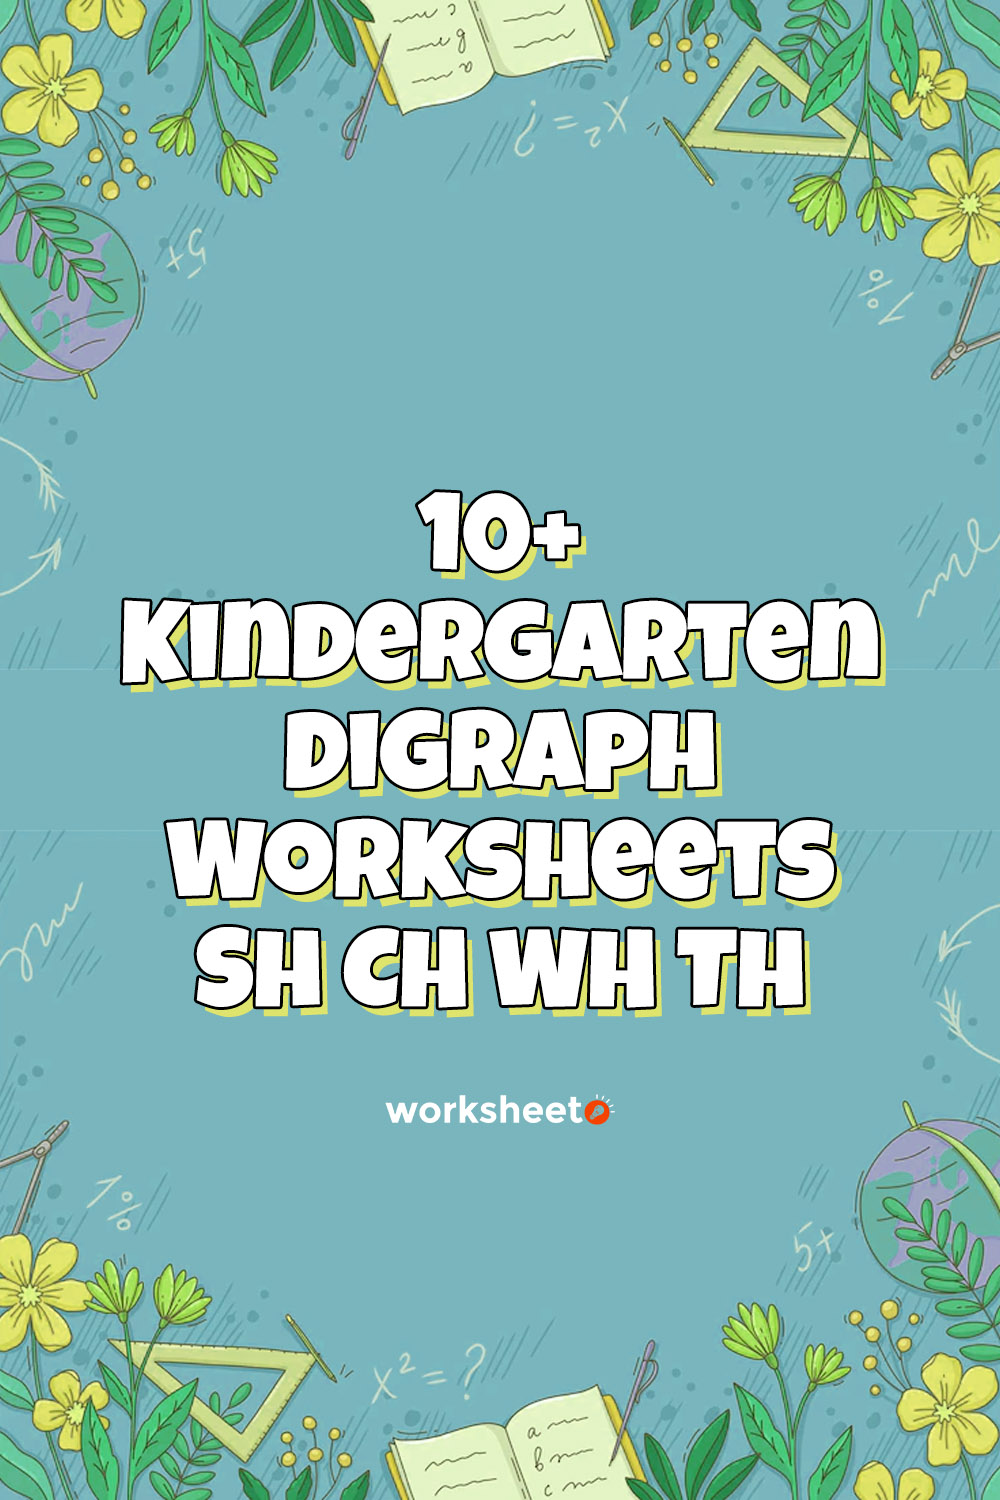 Kindergarten Digraph Worksheets Sh CH WH Th